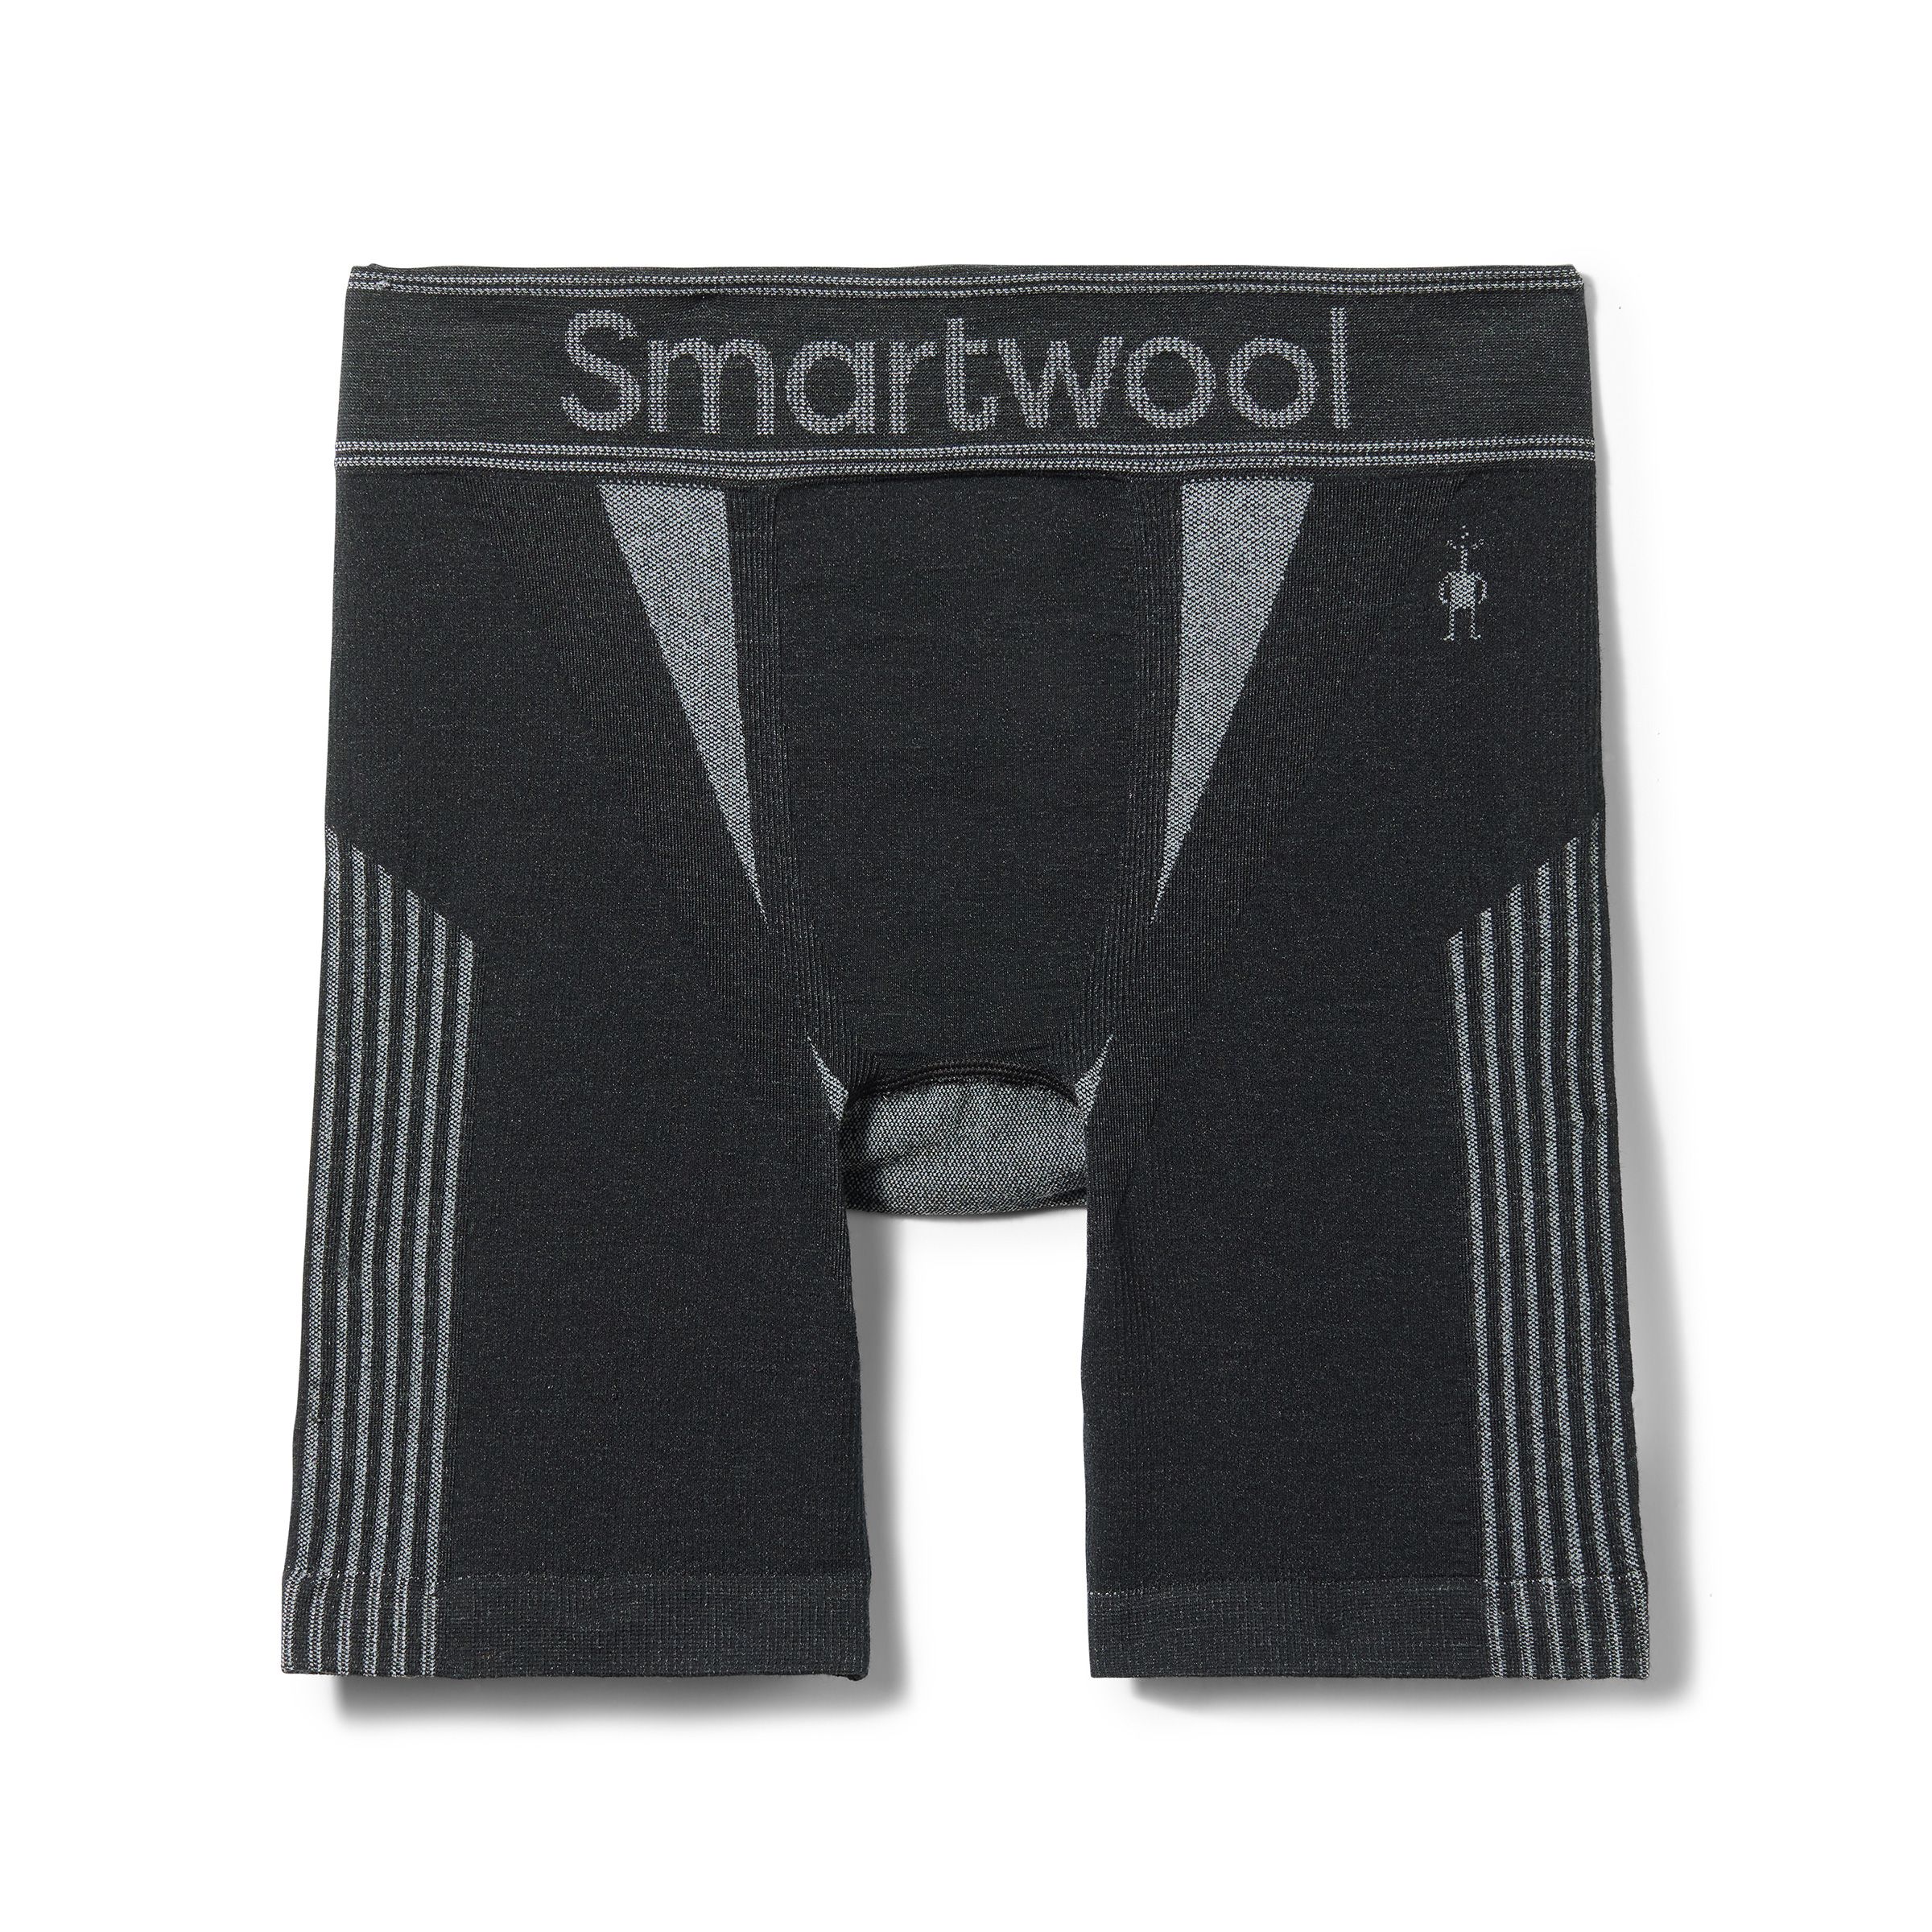 Sweat Proof Boxer Shorts Grey / Charcoal – Sutran Technology